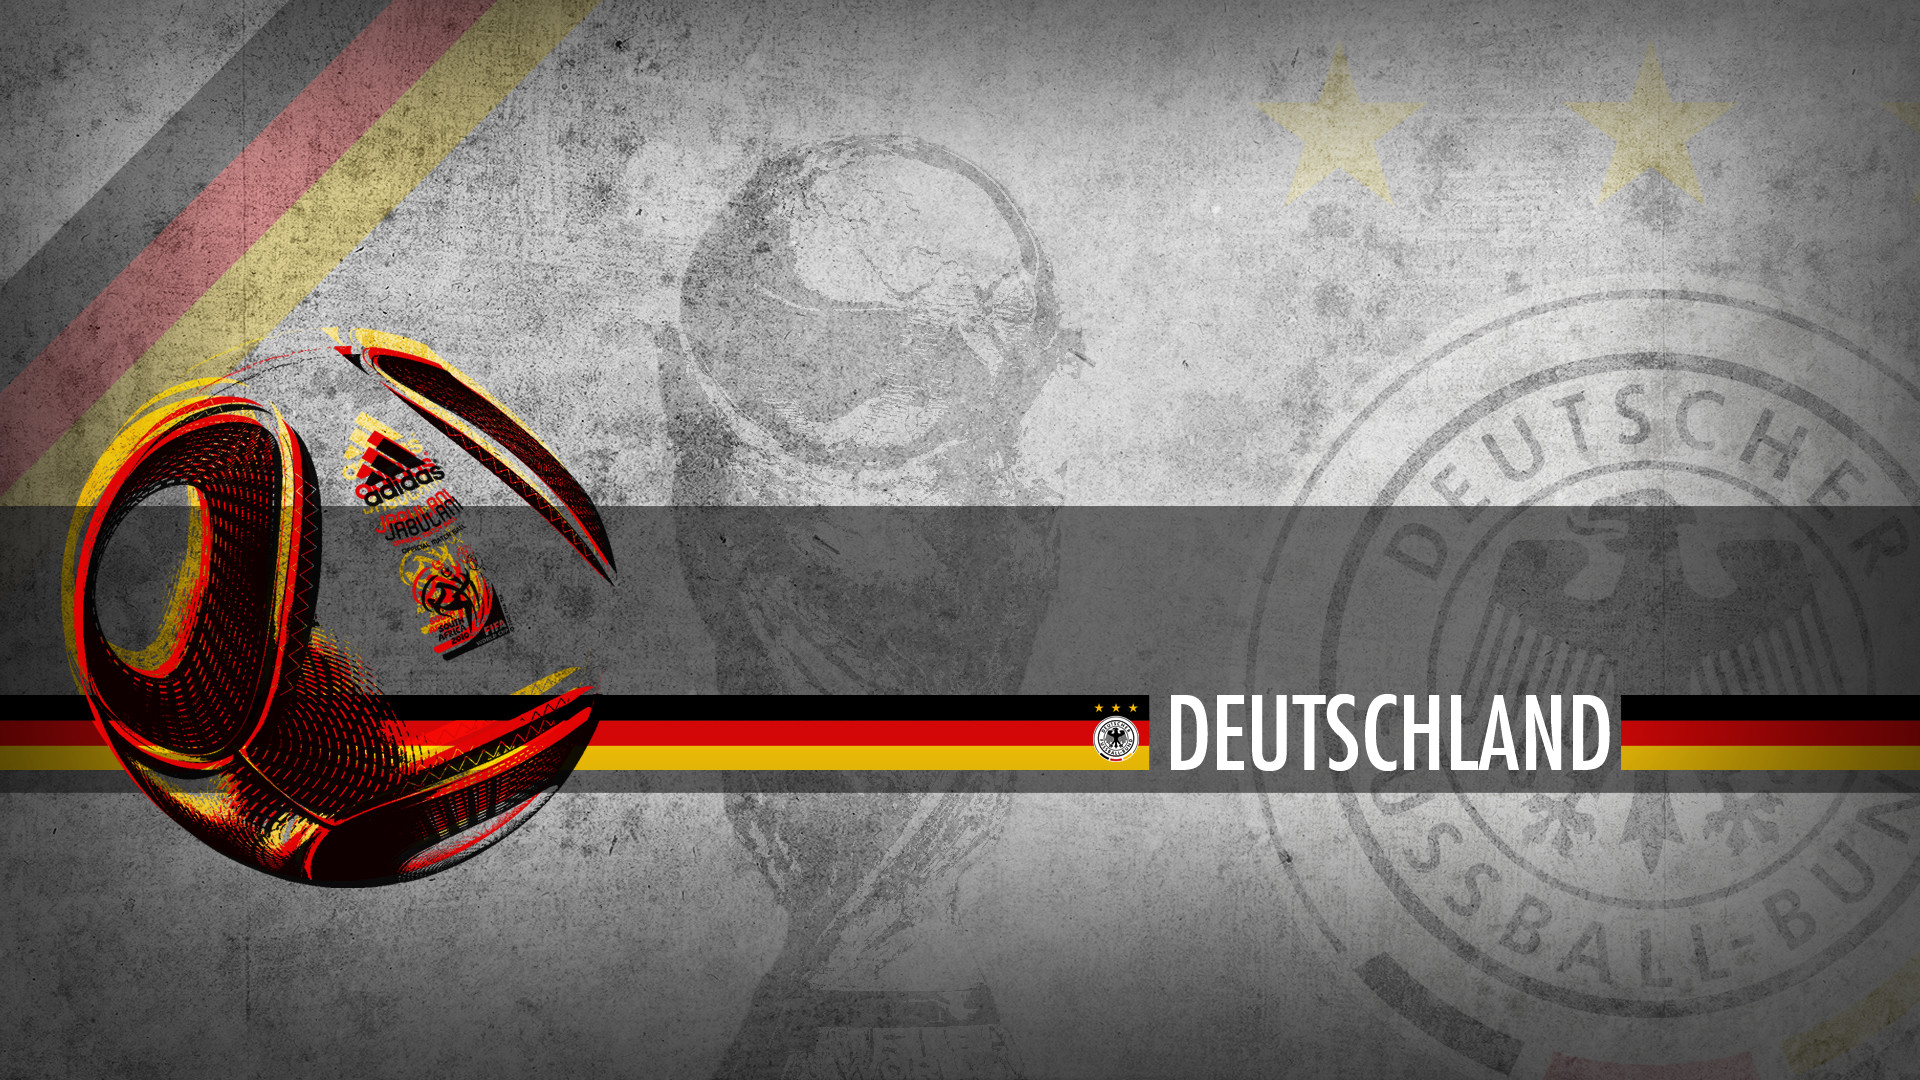 Hd Wallpaper And Background Photos Of Die Mannschaft - Germany Football Team Cover - HD Wallpaper 